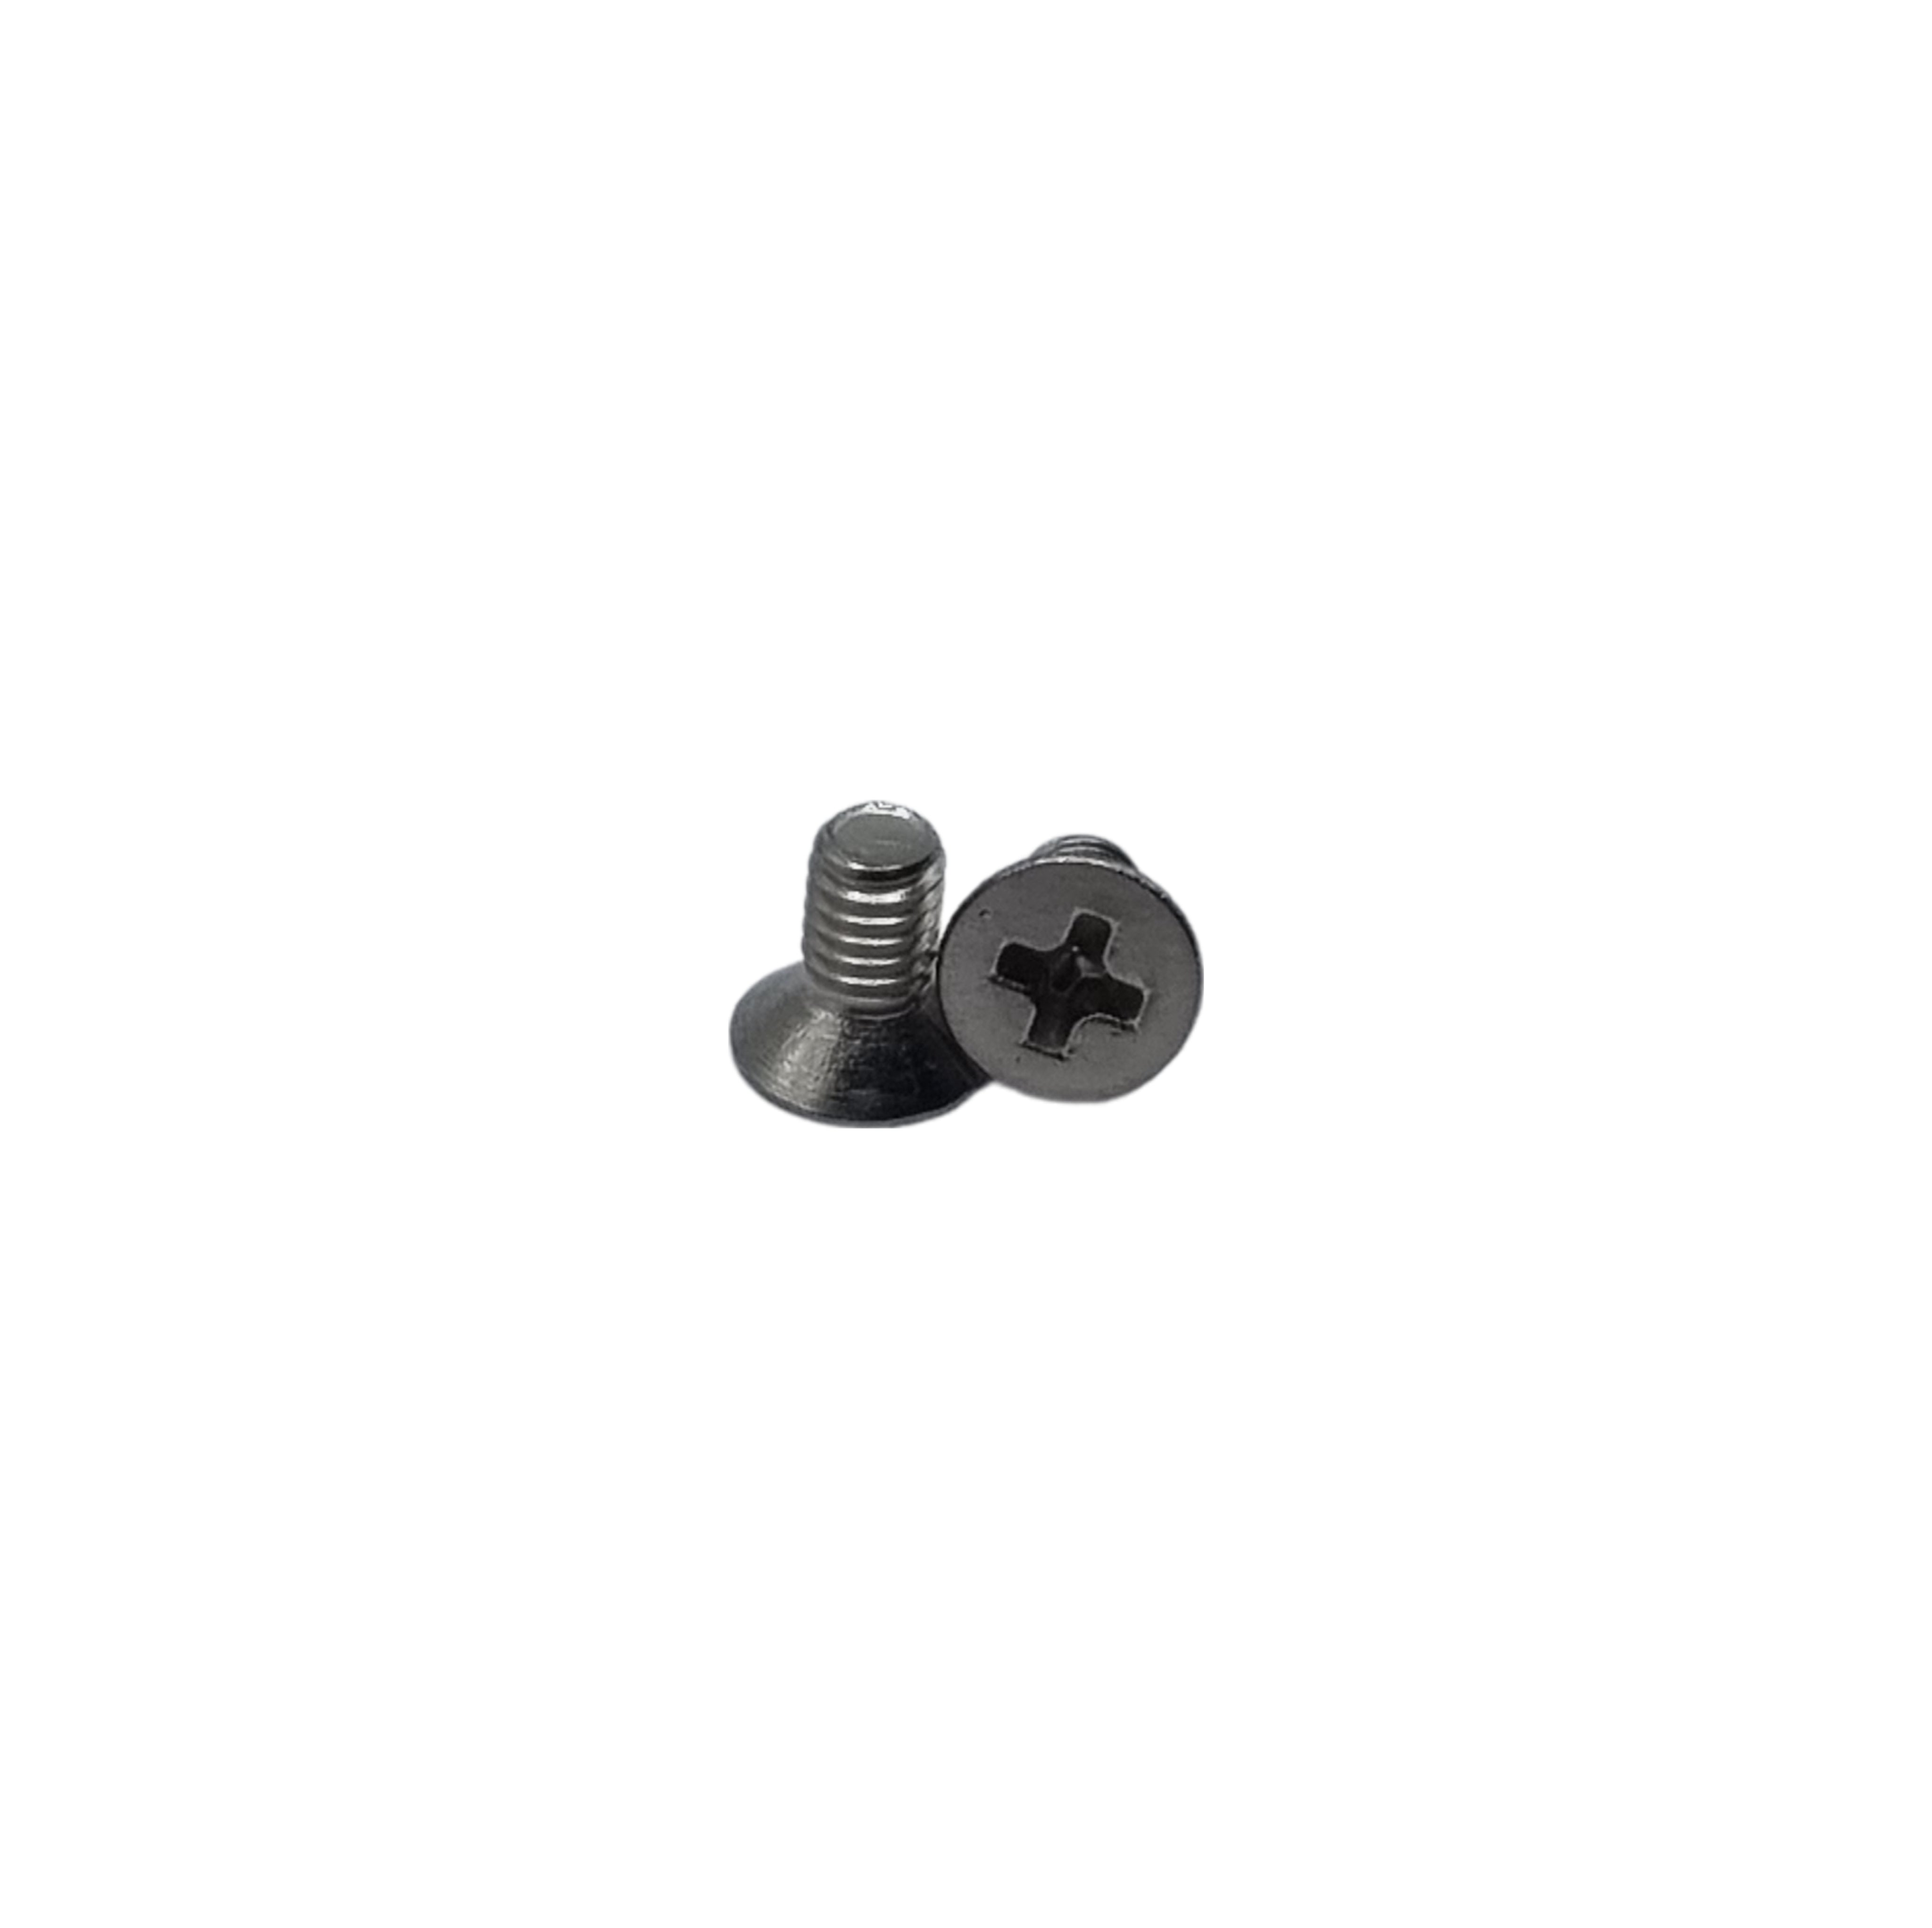 Ebog Designs AAP01 Part 5 - Hop Chamber Side Fixing Screw (Pair)